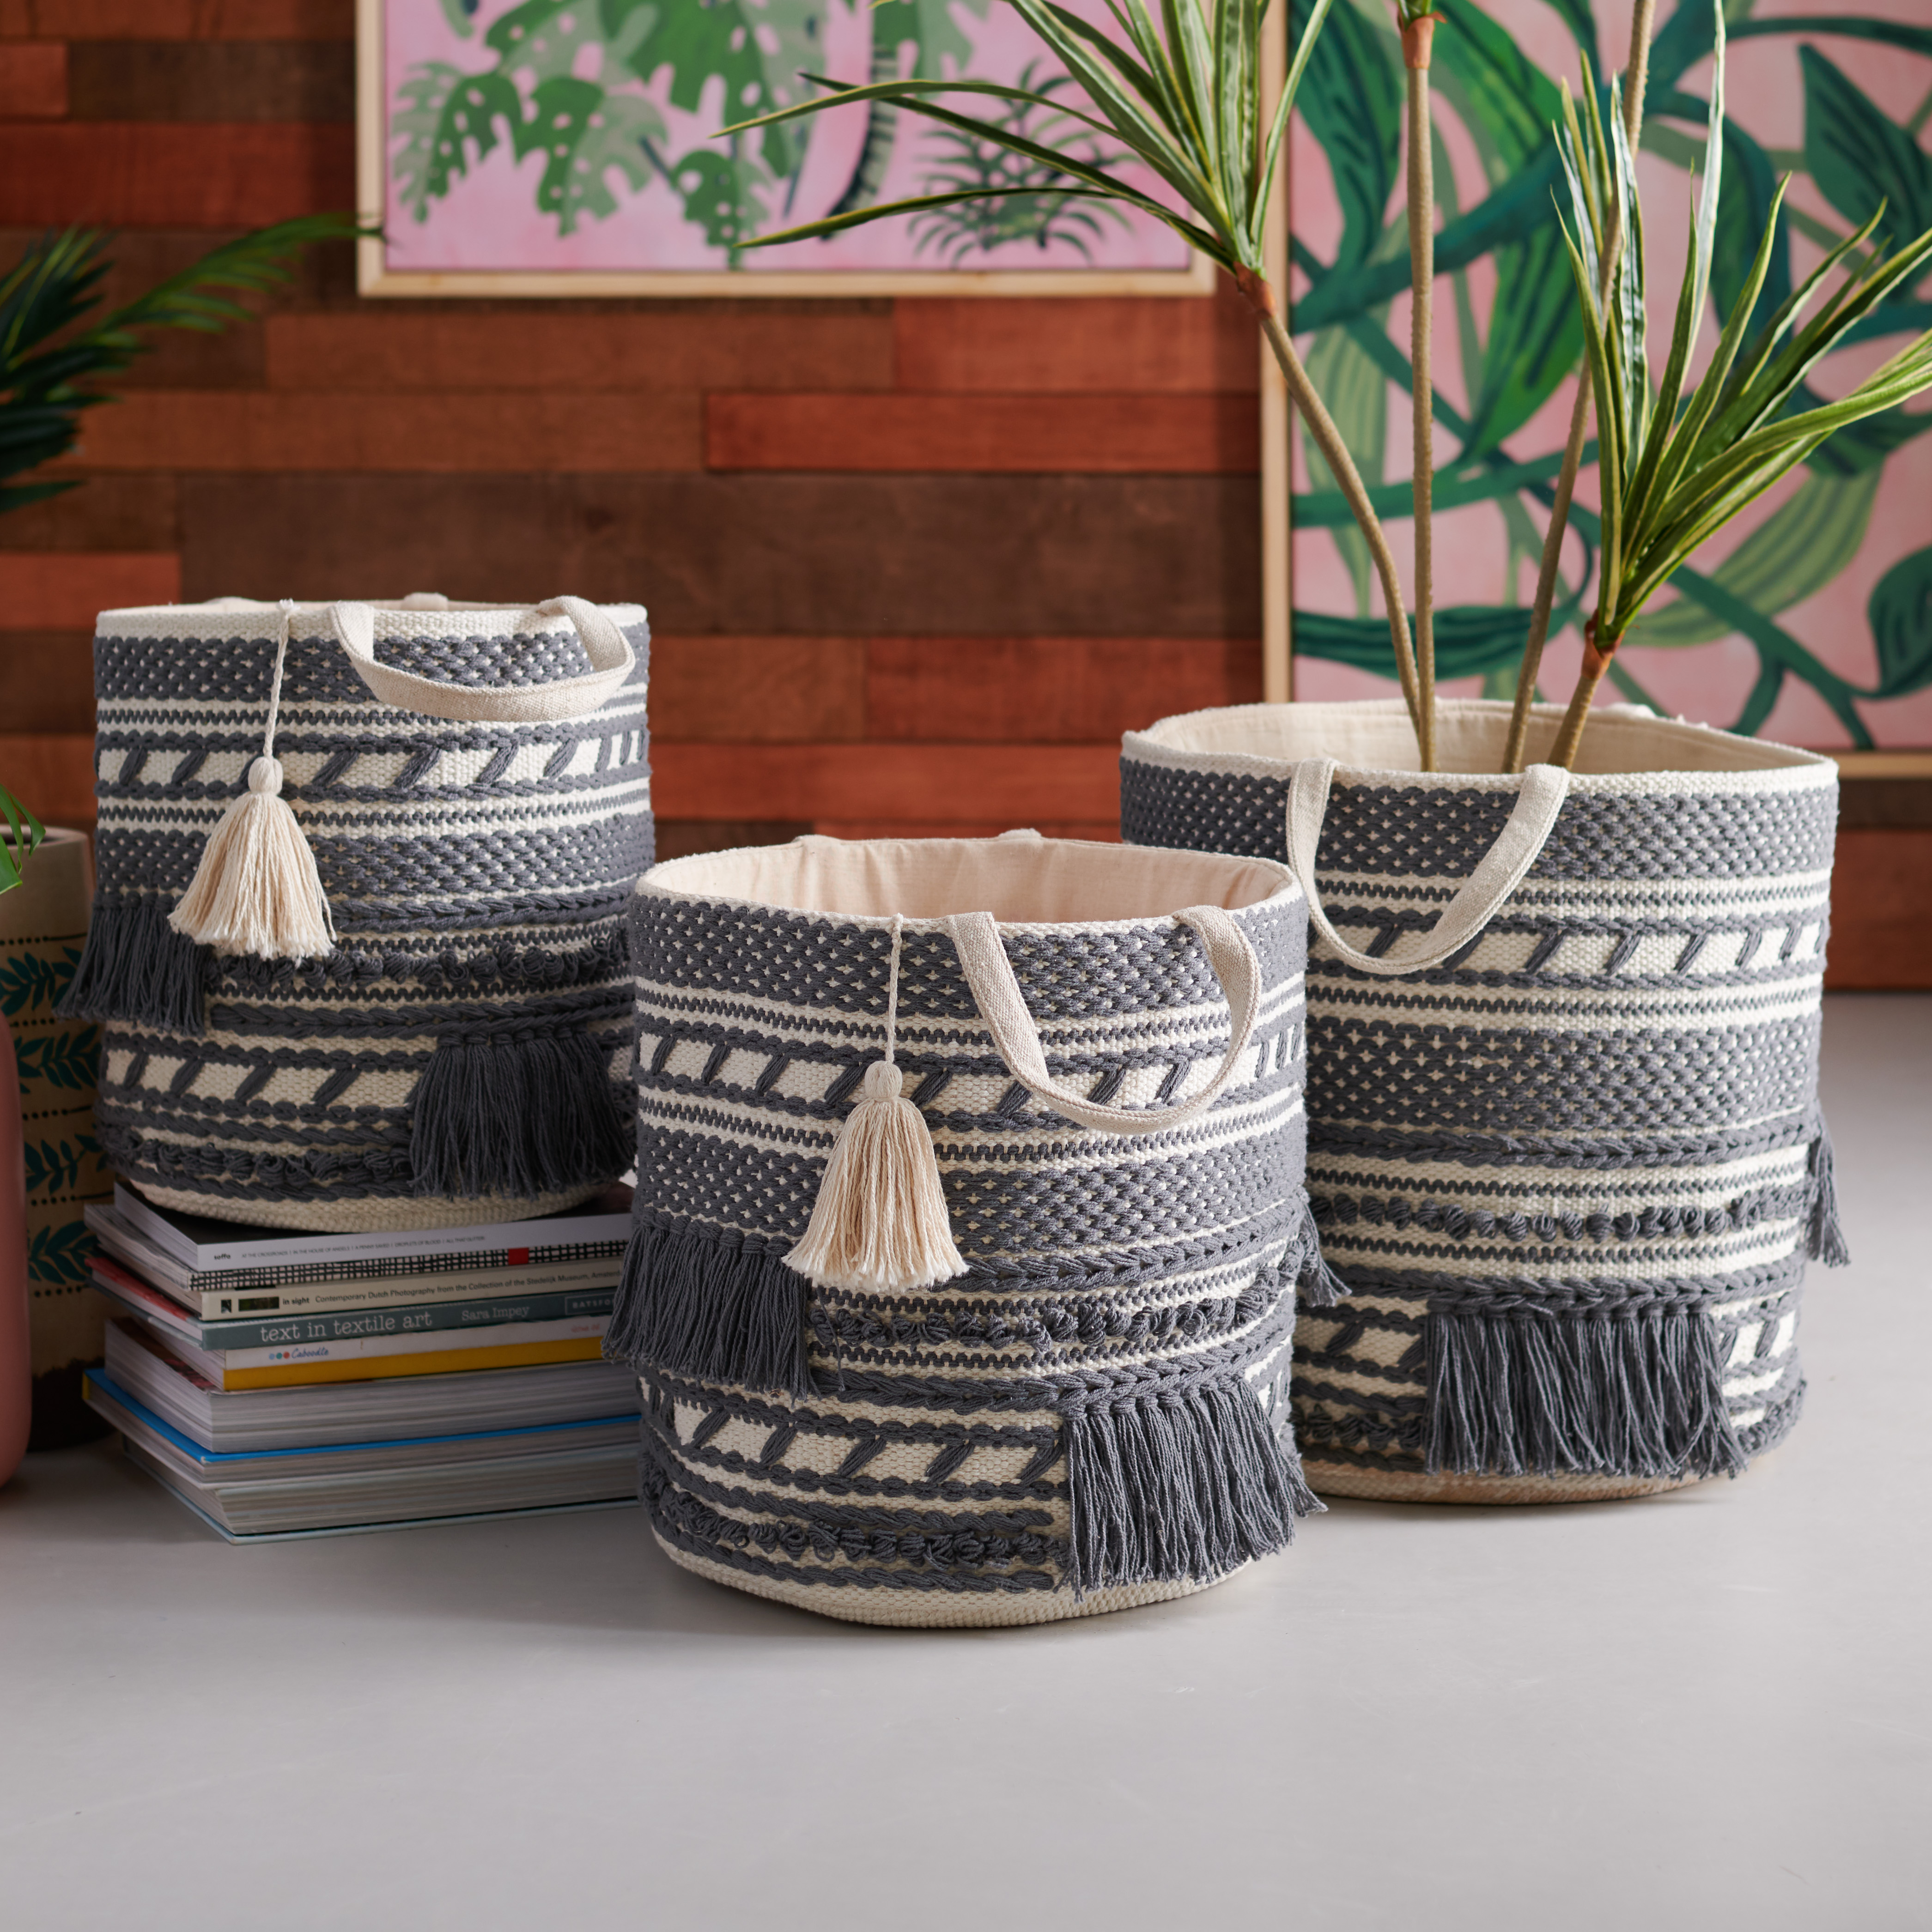 Hand Woven Macrame 3 Piece Basket Set, Natural and Charcoal by Drew Barrymore Flower Home - image 2 of 10